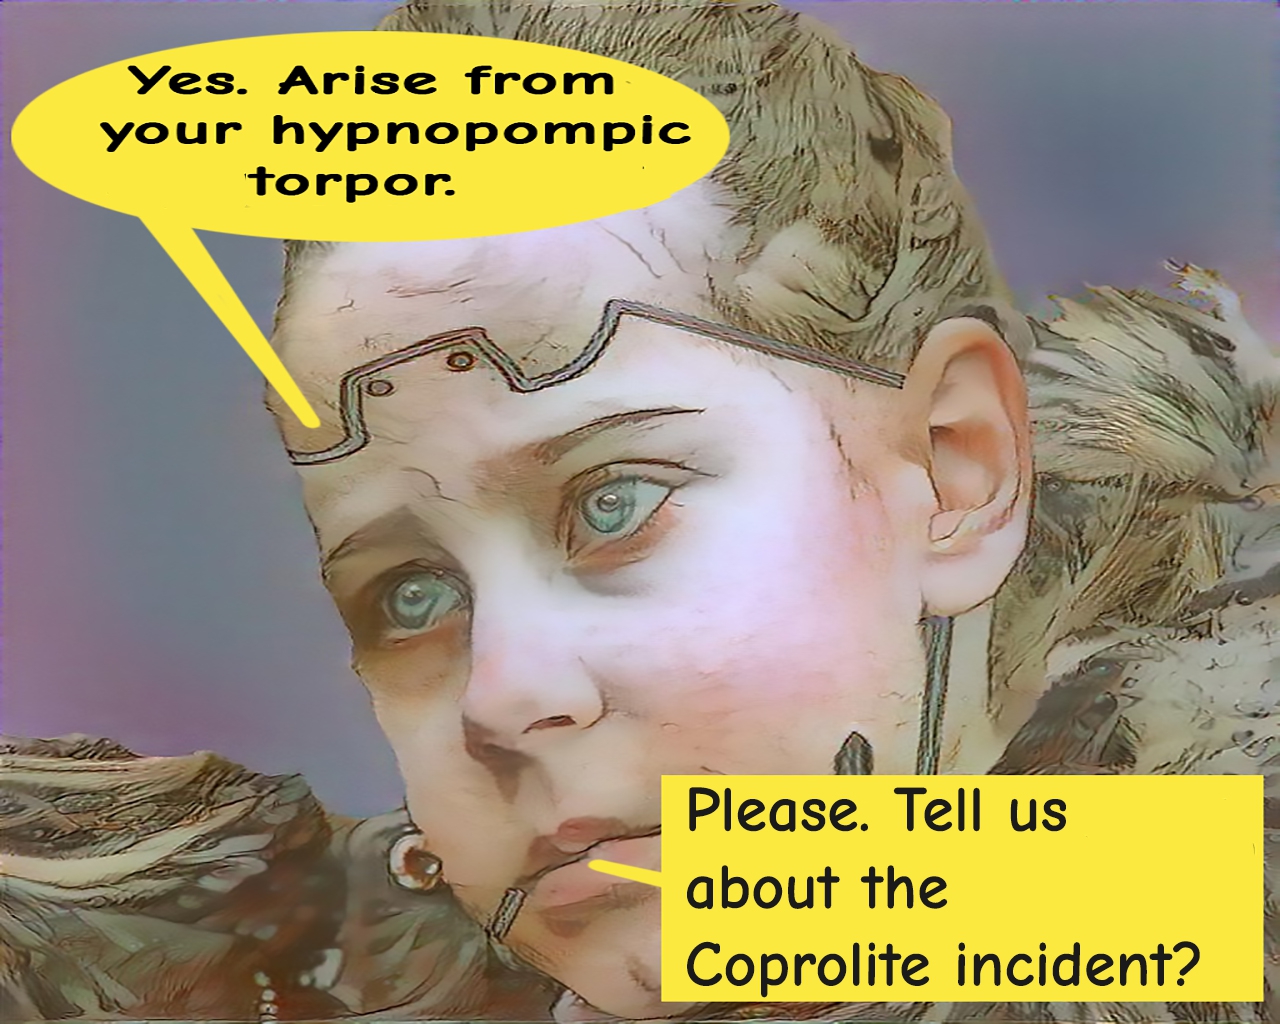 The cyborg Analytica asks him to arise from his hypnopompic torpor and to tell them about the Coprolite Incident.